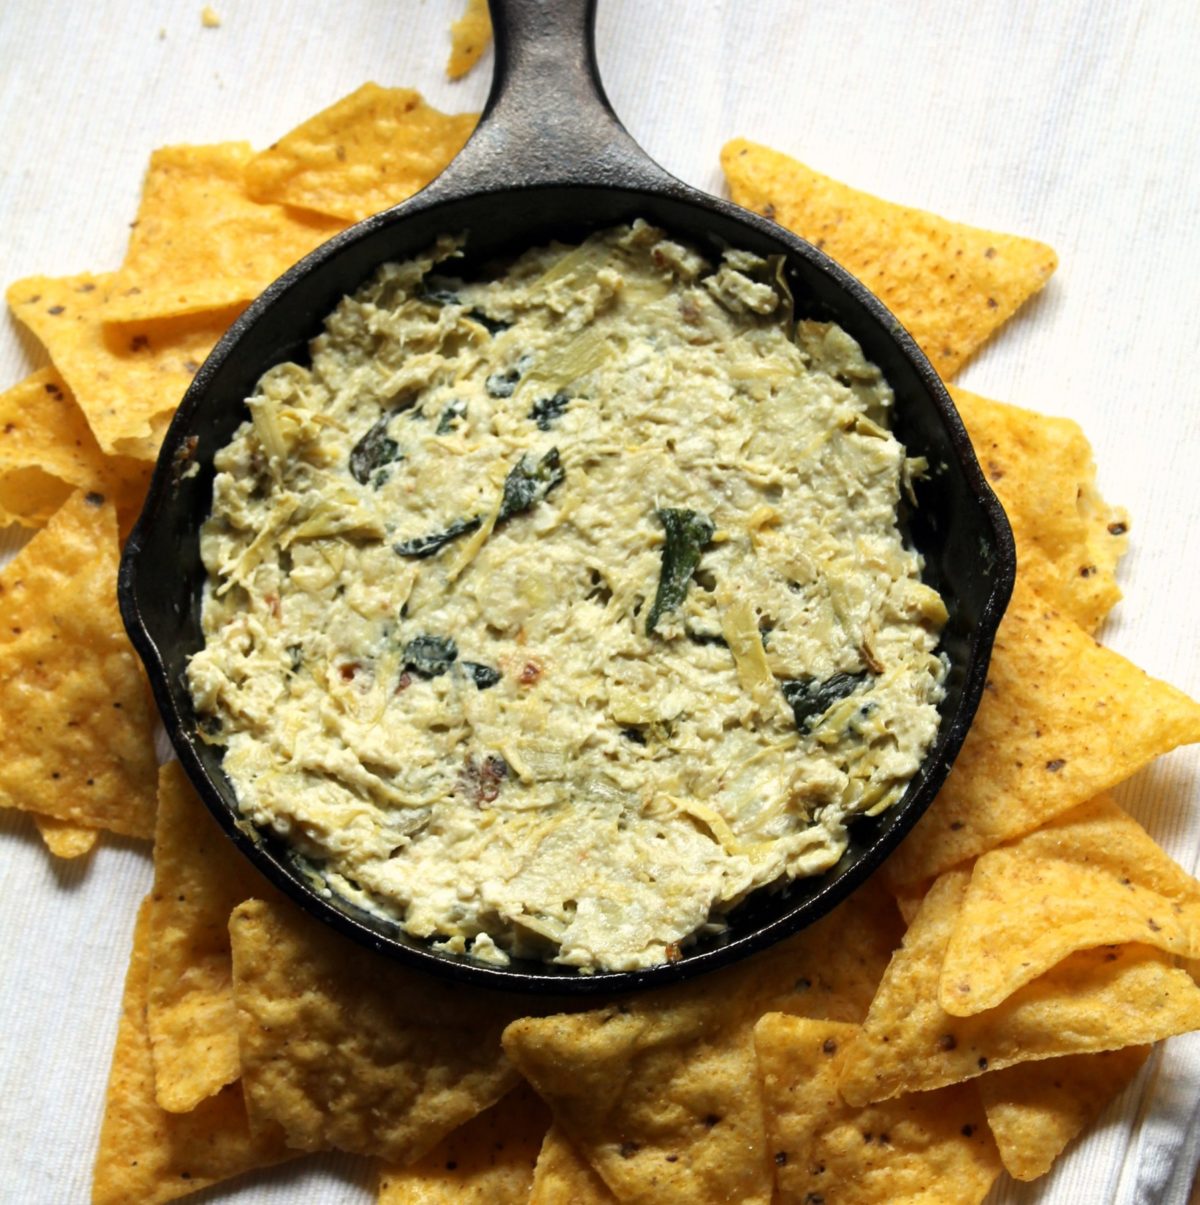 Simple feta and artichoke dip. 6 ingredients and nothing to chop! Much lighter than the usual artichoke dip, but I think it's actually tastier!